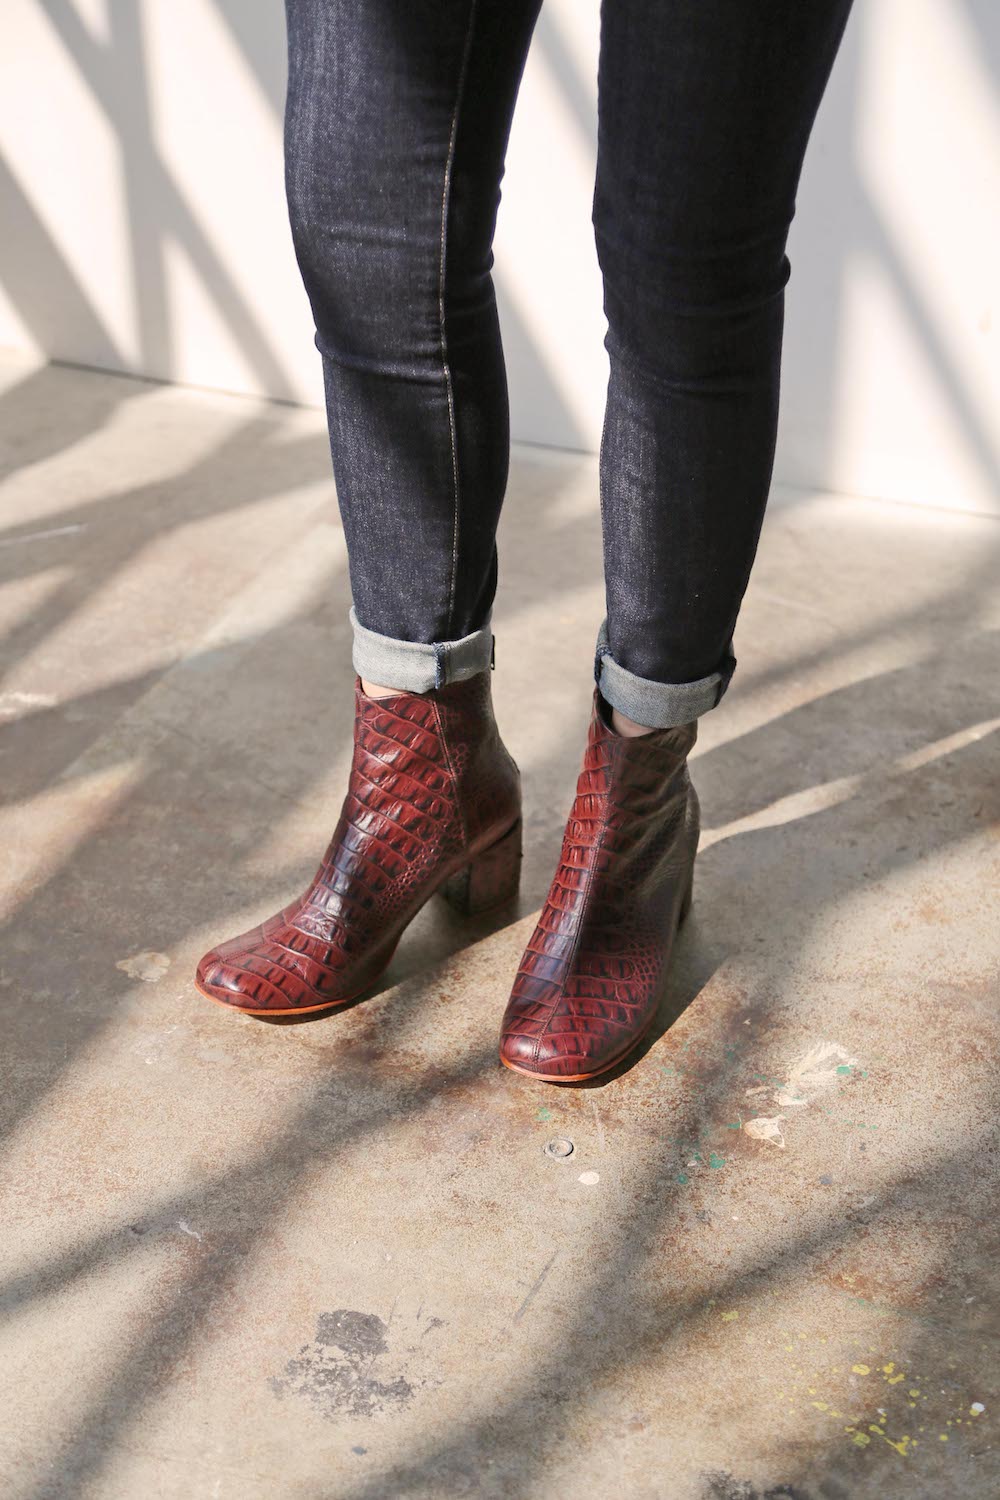 NEW Fall Boots by Zou Xou!